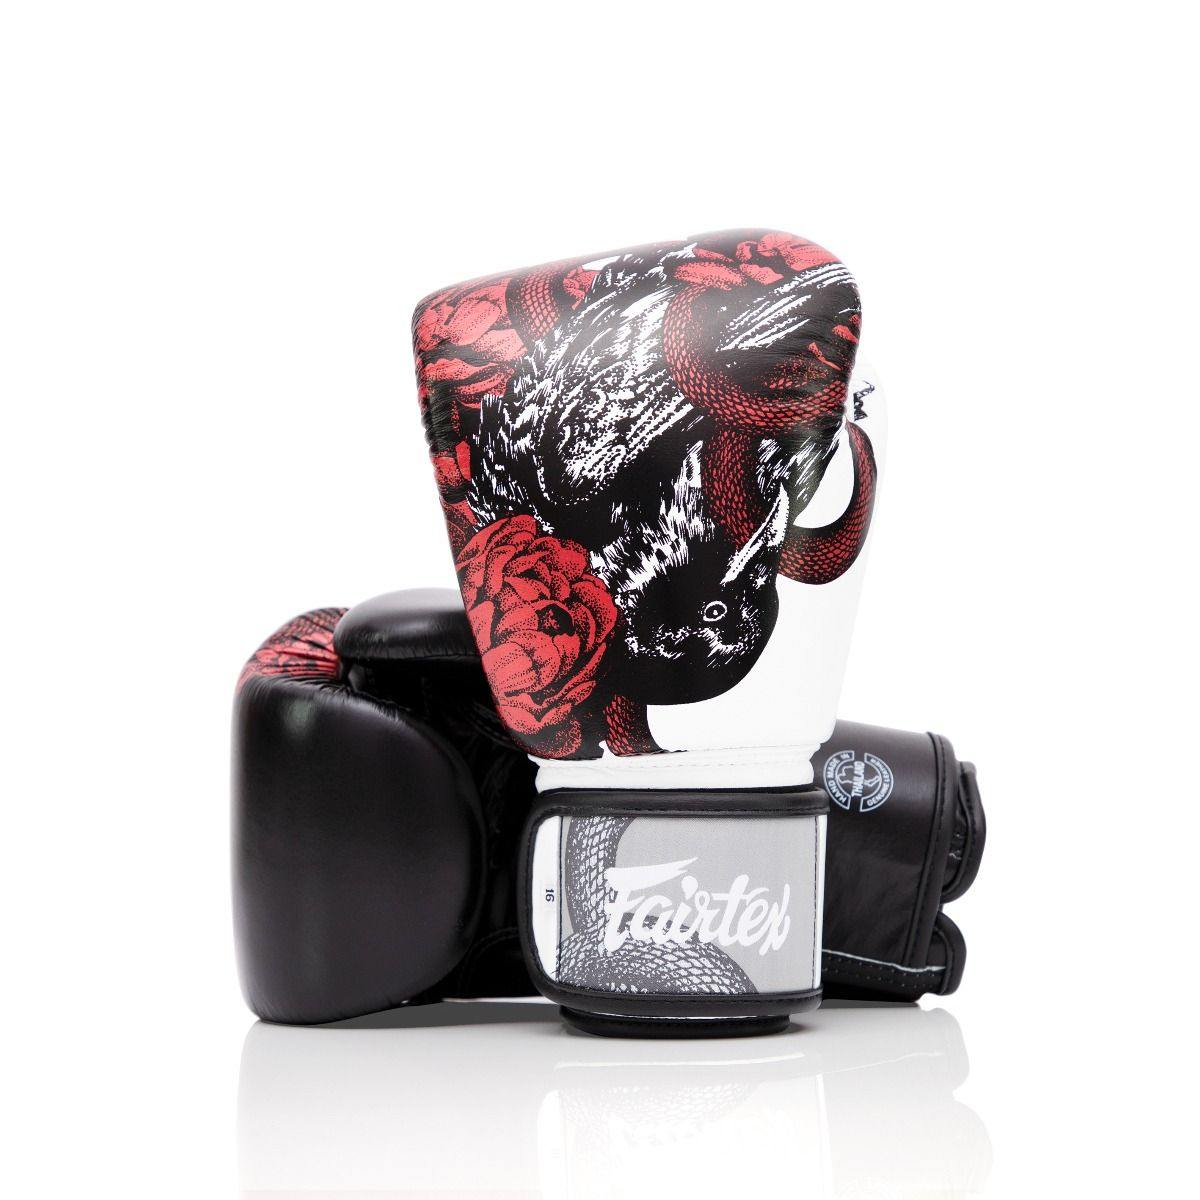 FAIRTEX THE BEAUTY OF SURVIVAL - LIMITED EDITION BOXING GLOVES